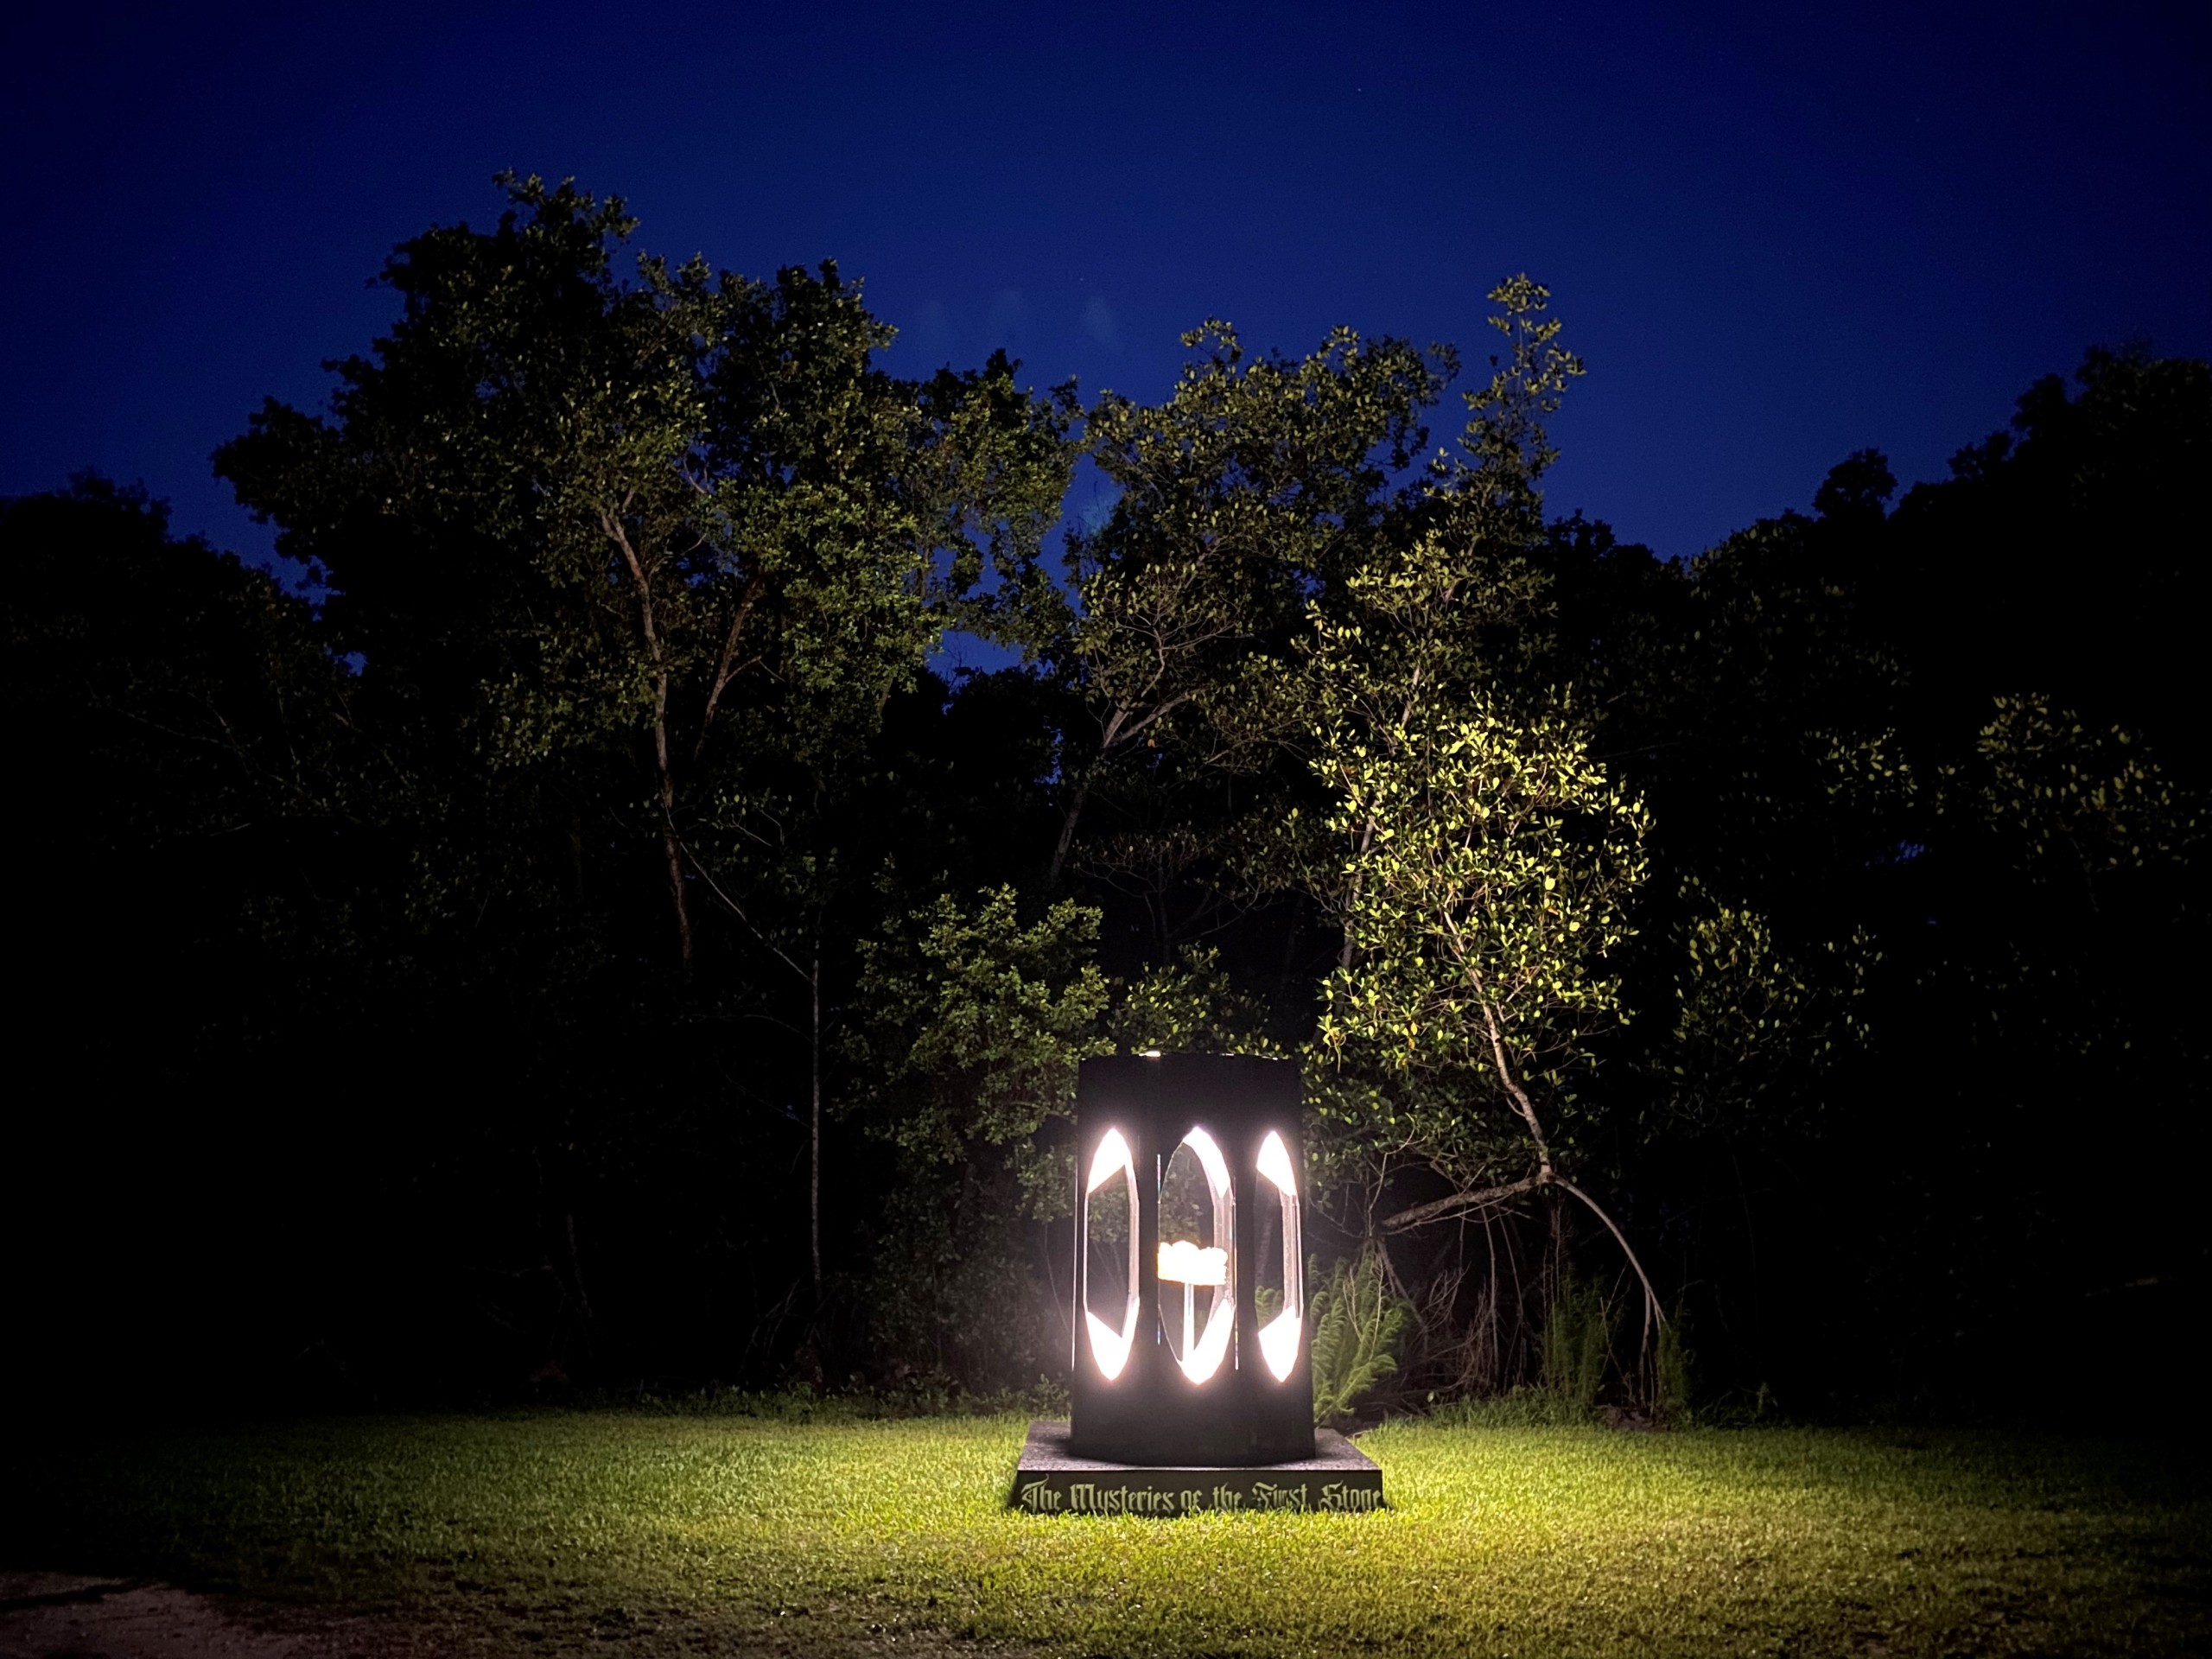  Richard Moreno: Mysteries of the First Stone, Deering Estate Exhibits 2020